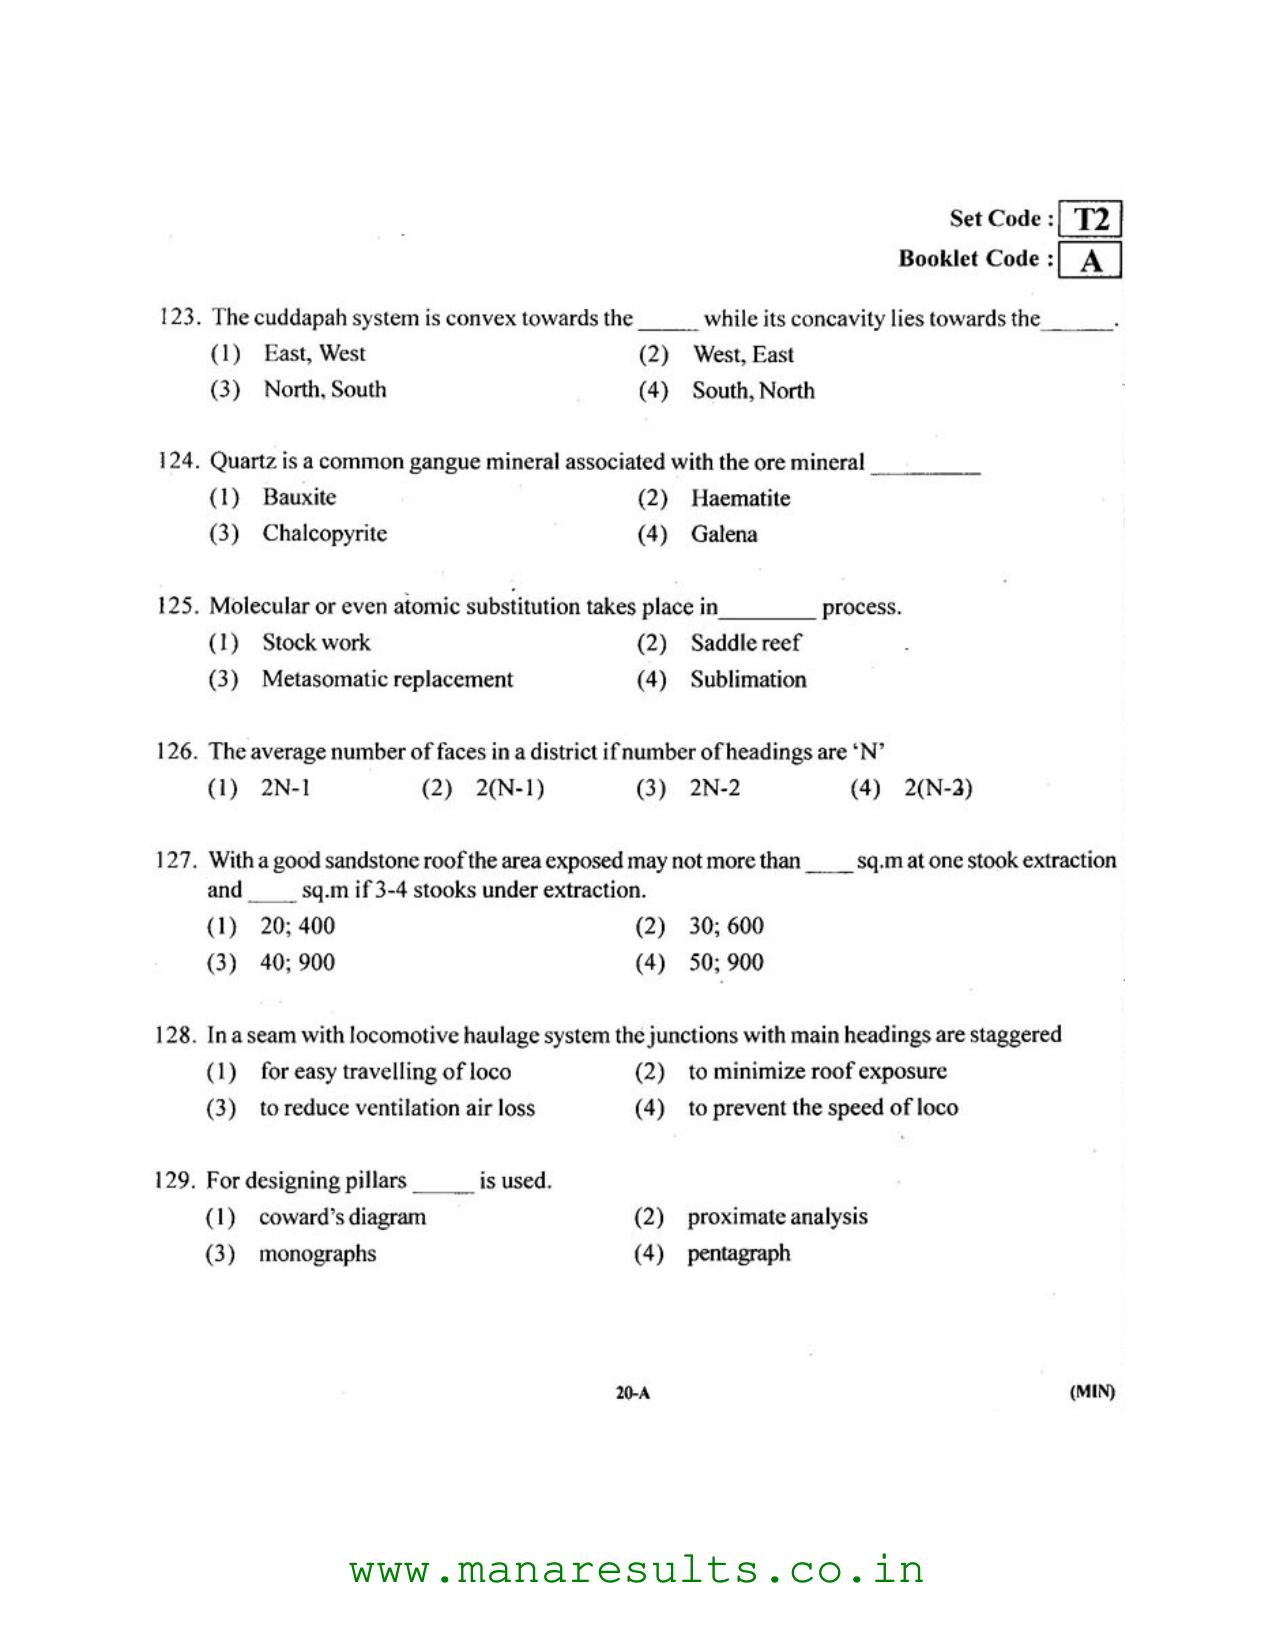 AP ECET 2016 Mining Engineering Old Previous Question Papers - Page 19